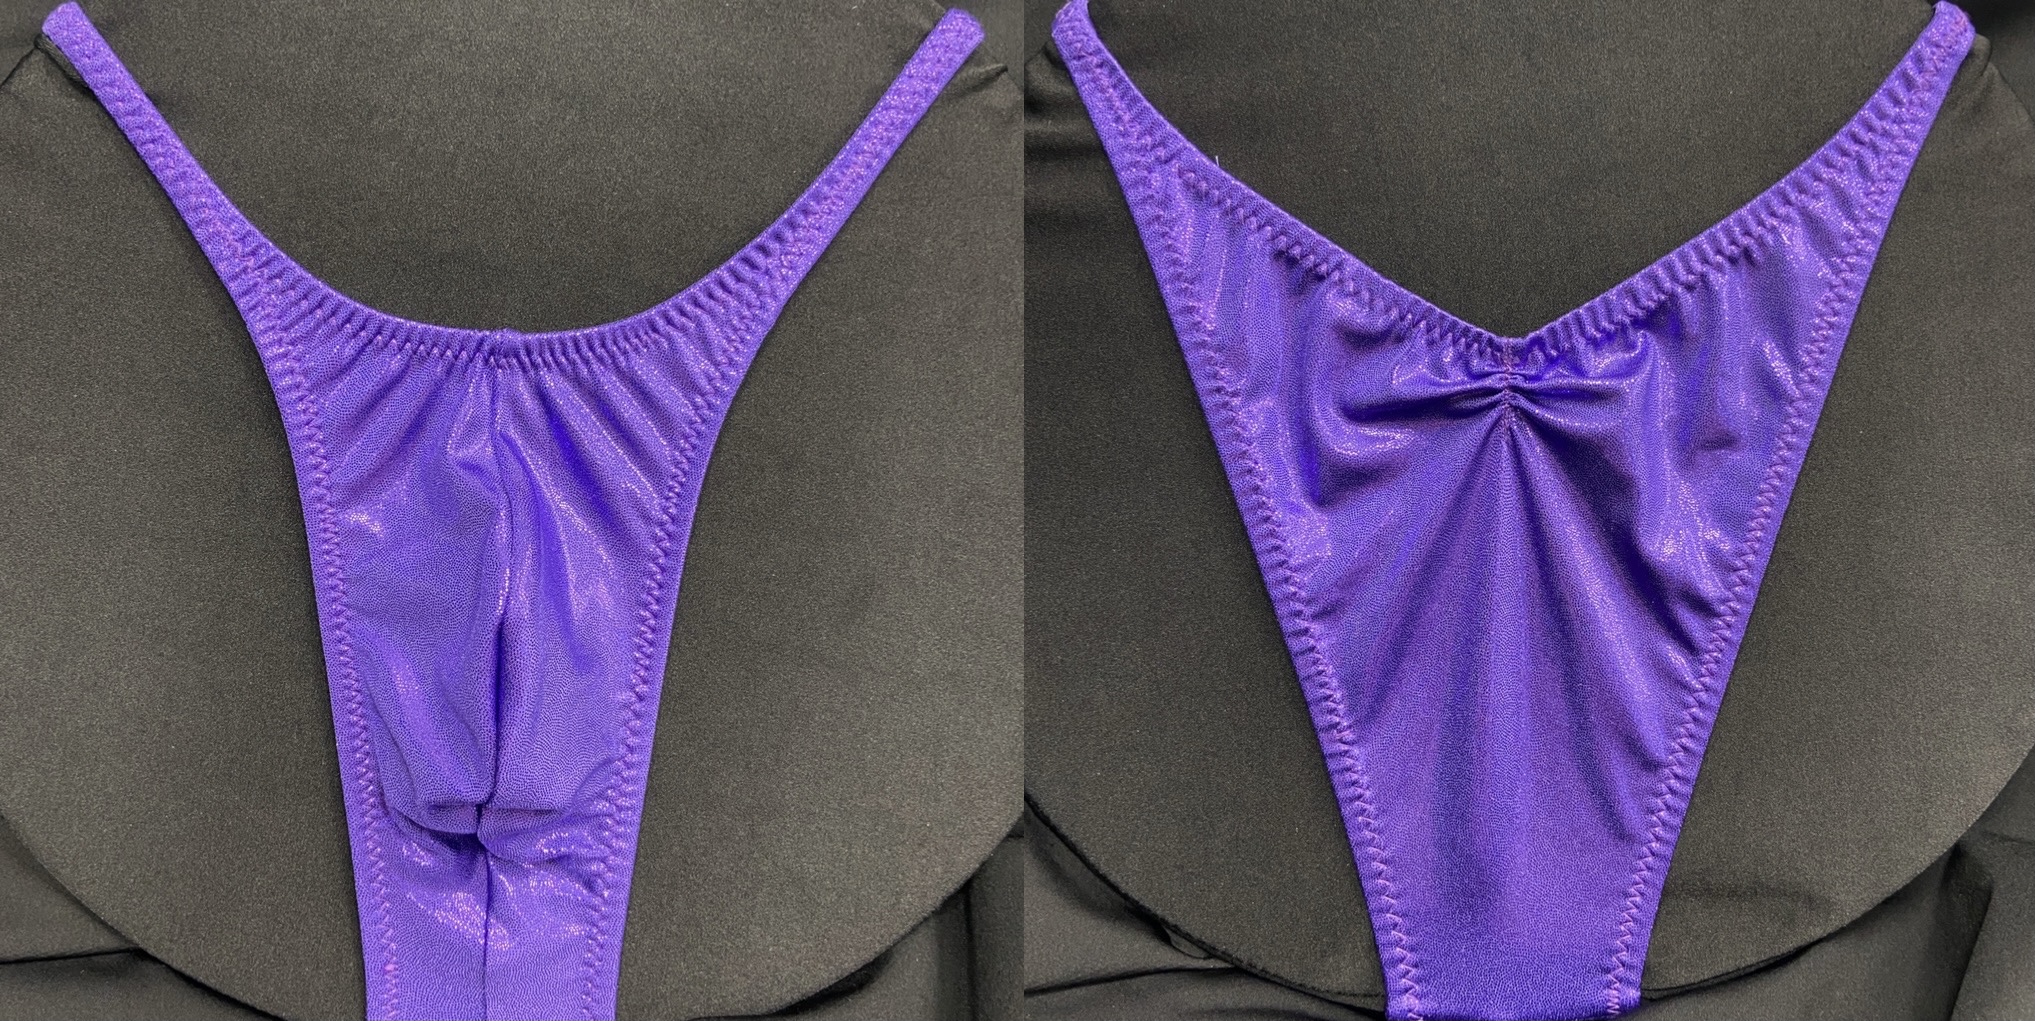 Purple wetlook fabric
Pro Cut 
available in S,M,L,XL
back gathers optional
$45.00